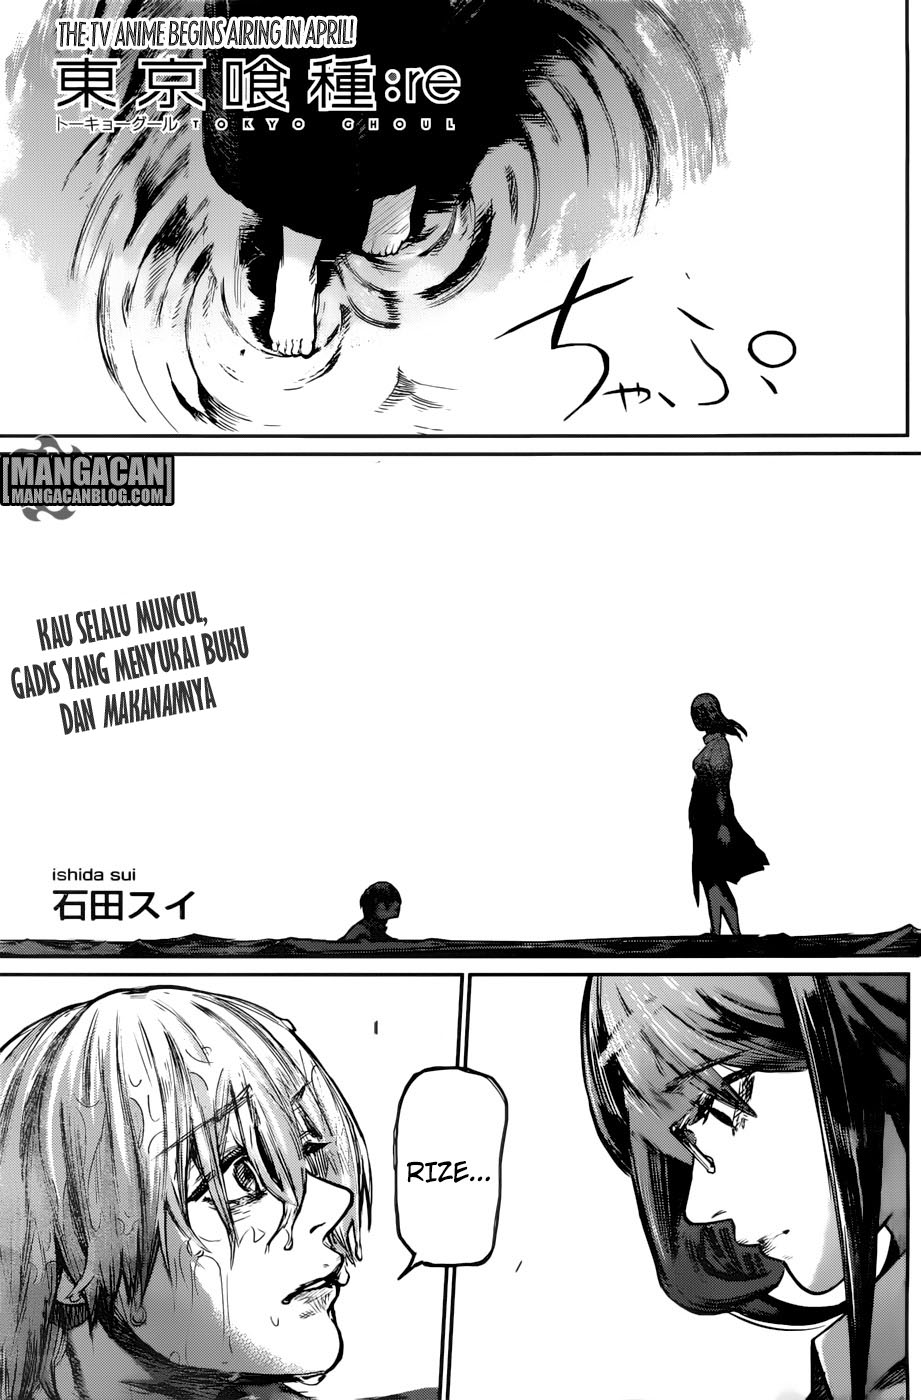 Tokyo Ghoul: re: Chapter 158 - Page 1